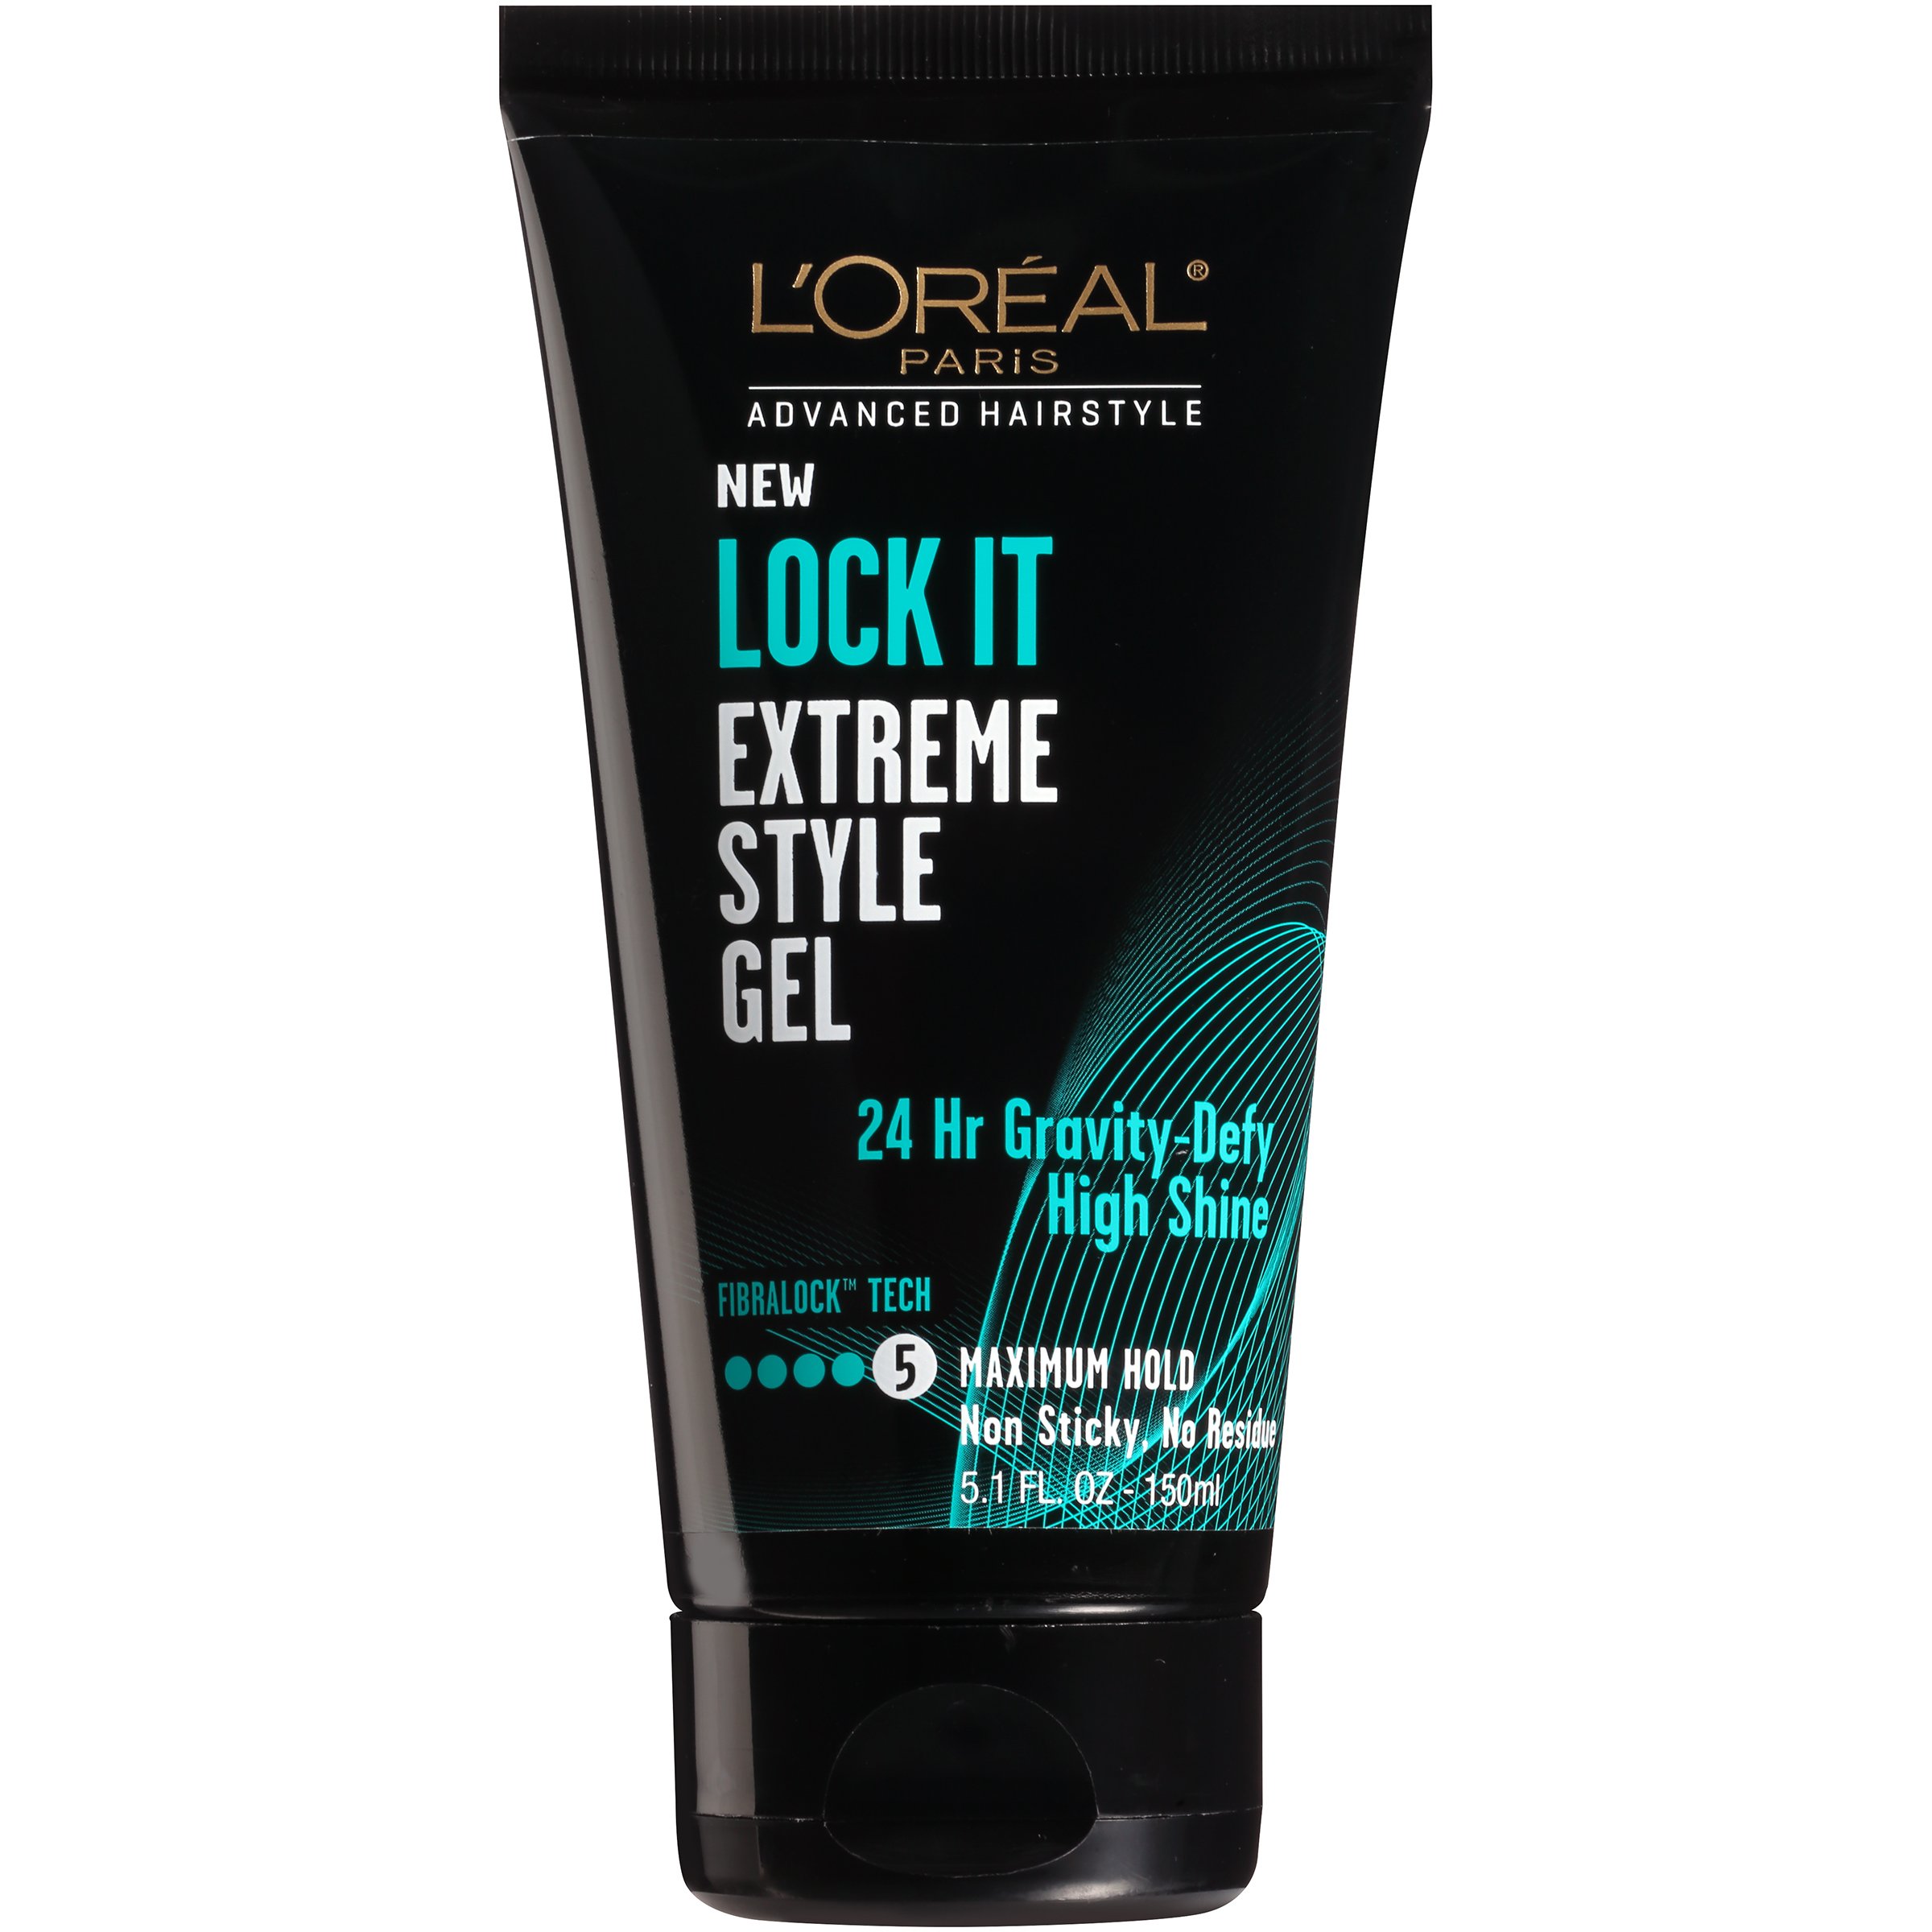 L'Oreal Paris Advanced Hairstyle LOCK IT Extreme Style Gel - Shop